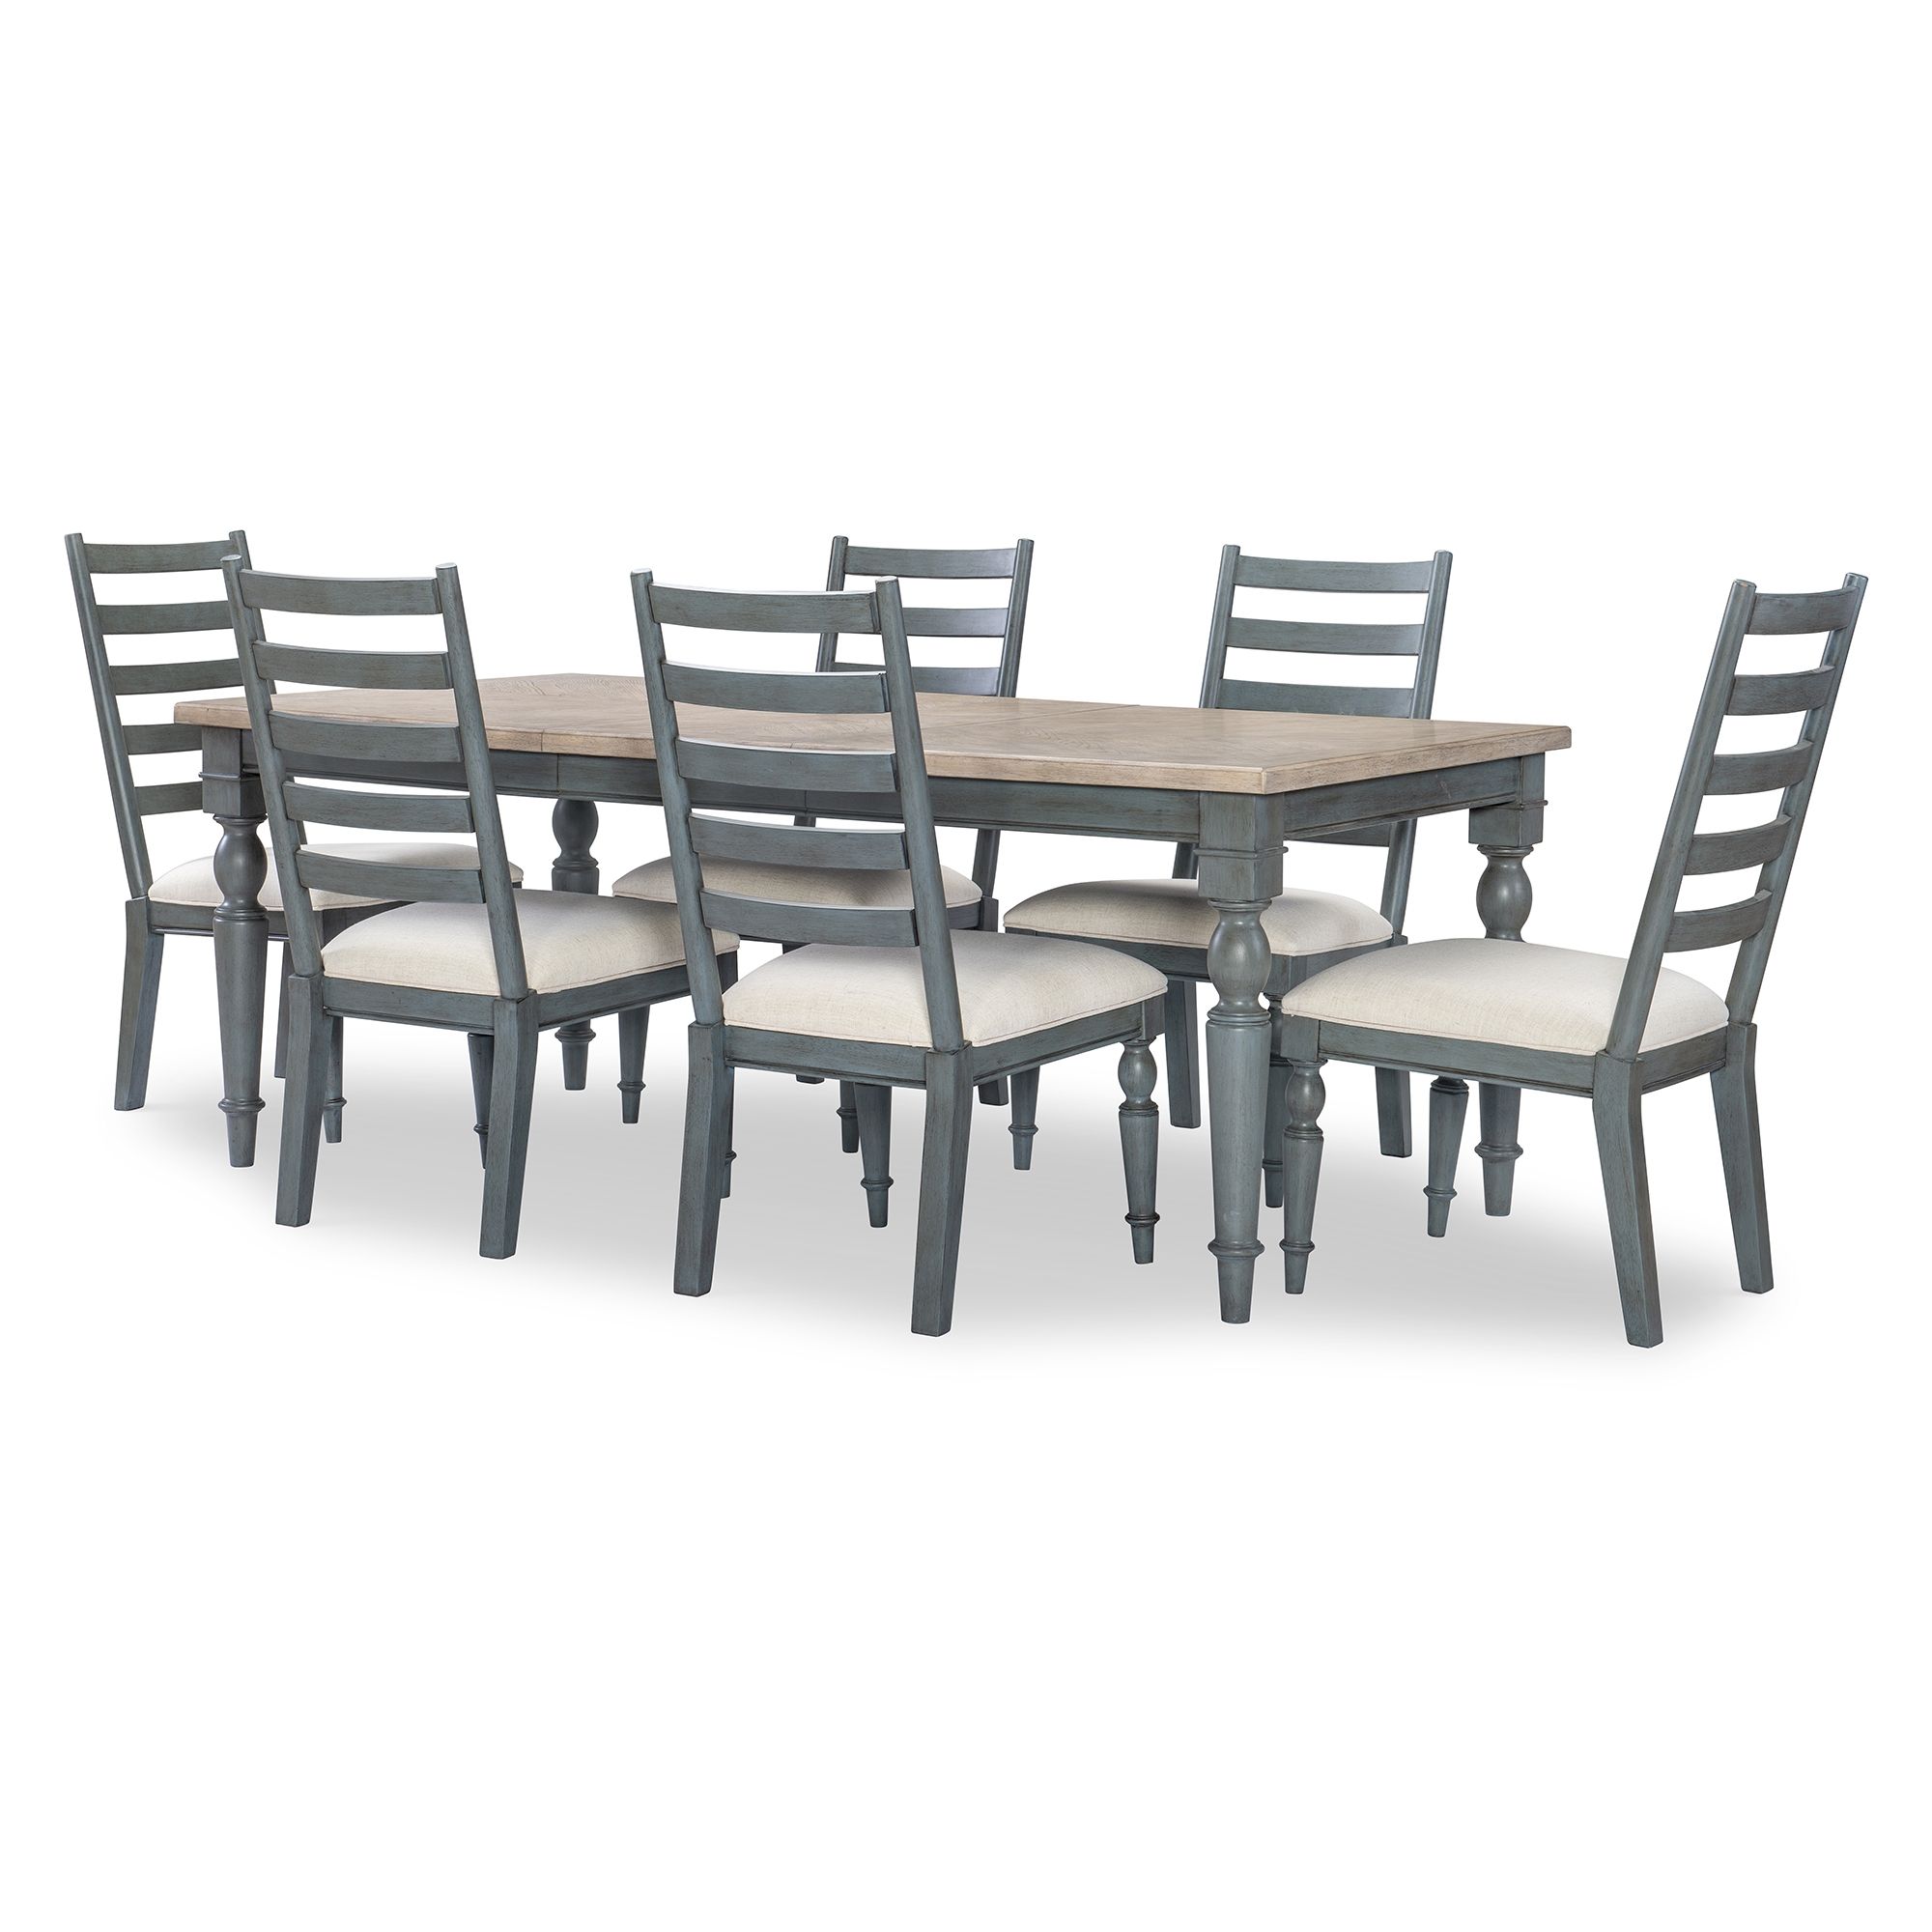 Poly Lumber Patio Furniture Set Including 1 Oval Table with 2 Ladderback Arm Chairs and 4 Side Chairs in Gray and Black Amish Made in USA 60 